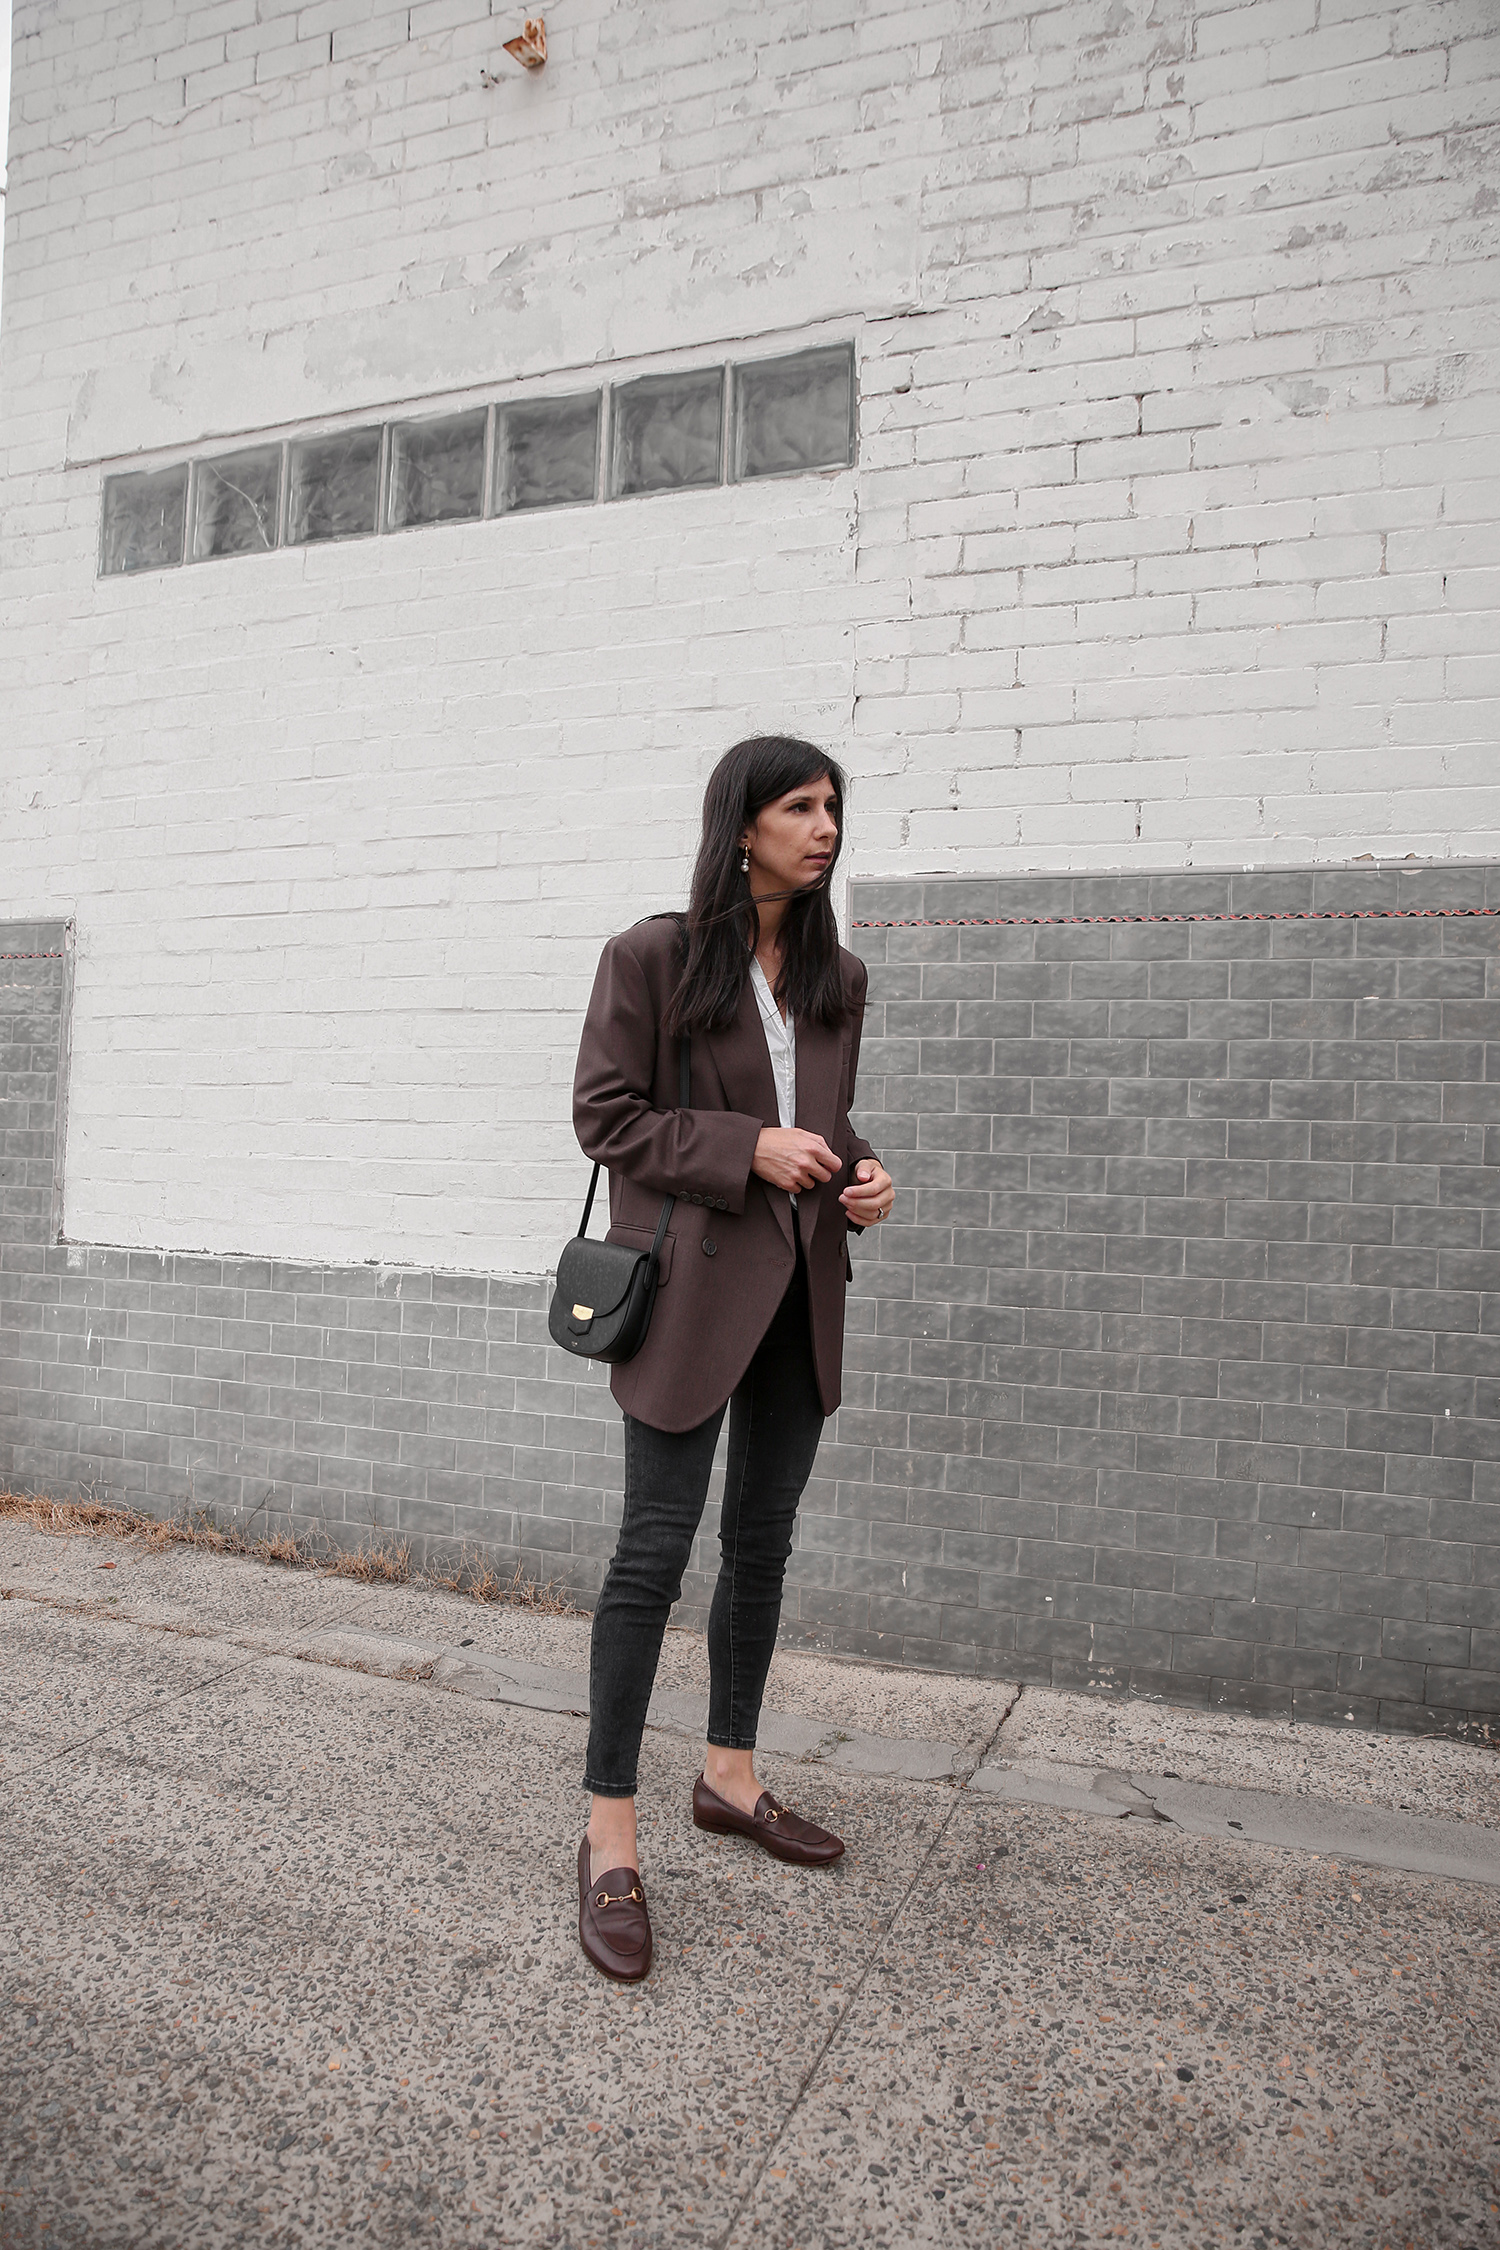 Three ways to create balance in an outfit